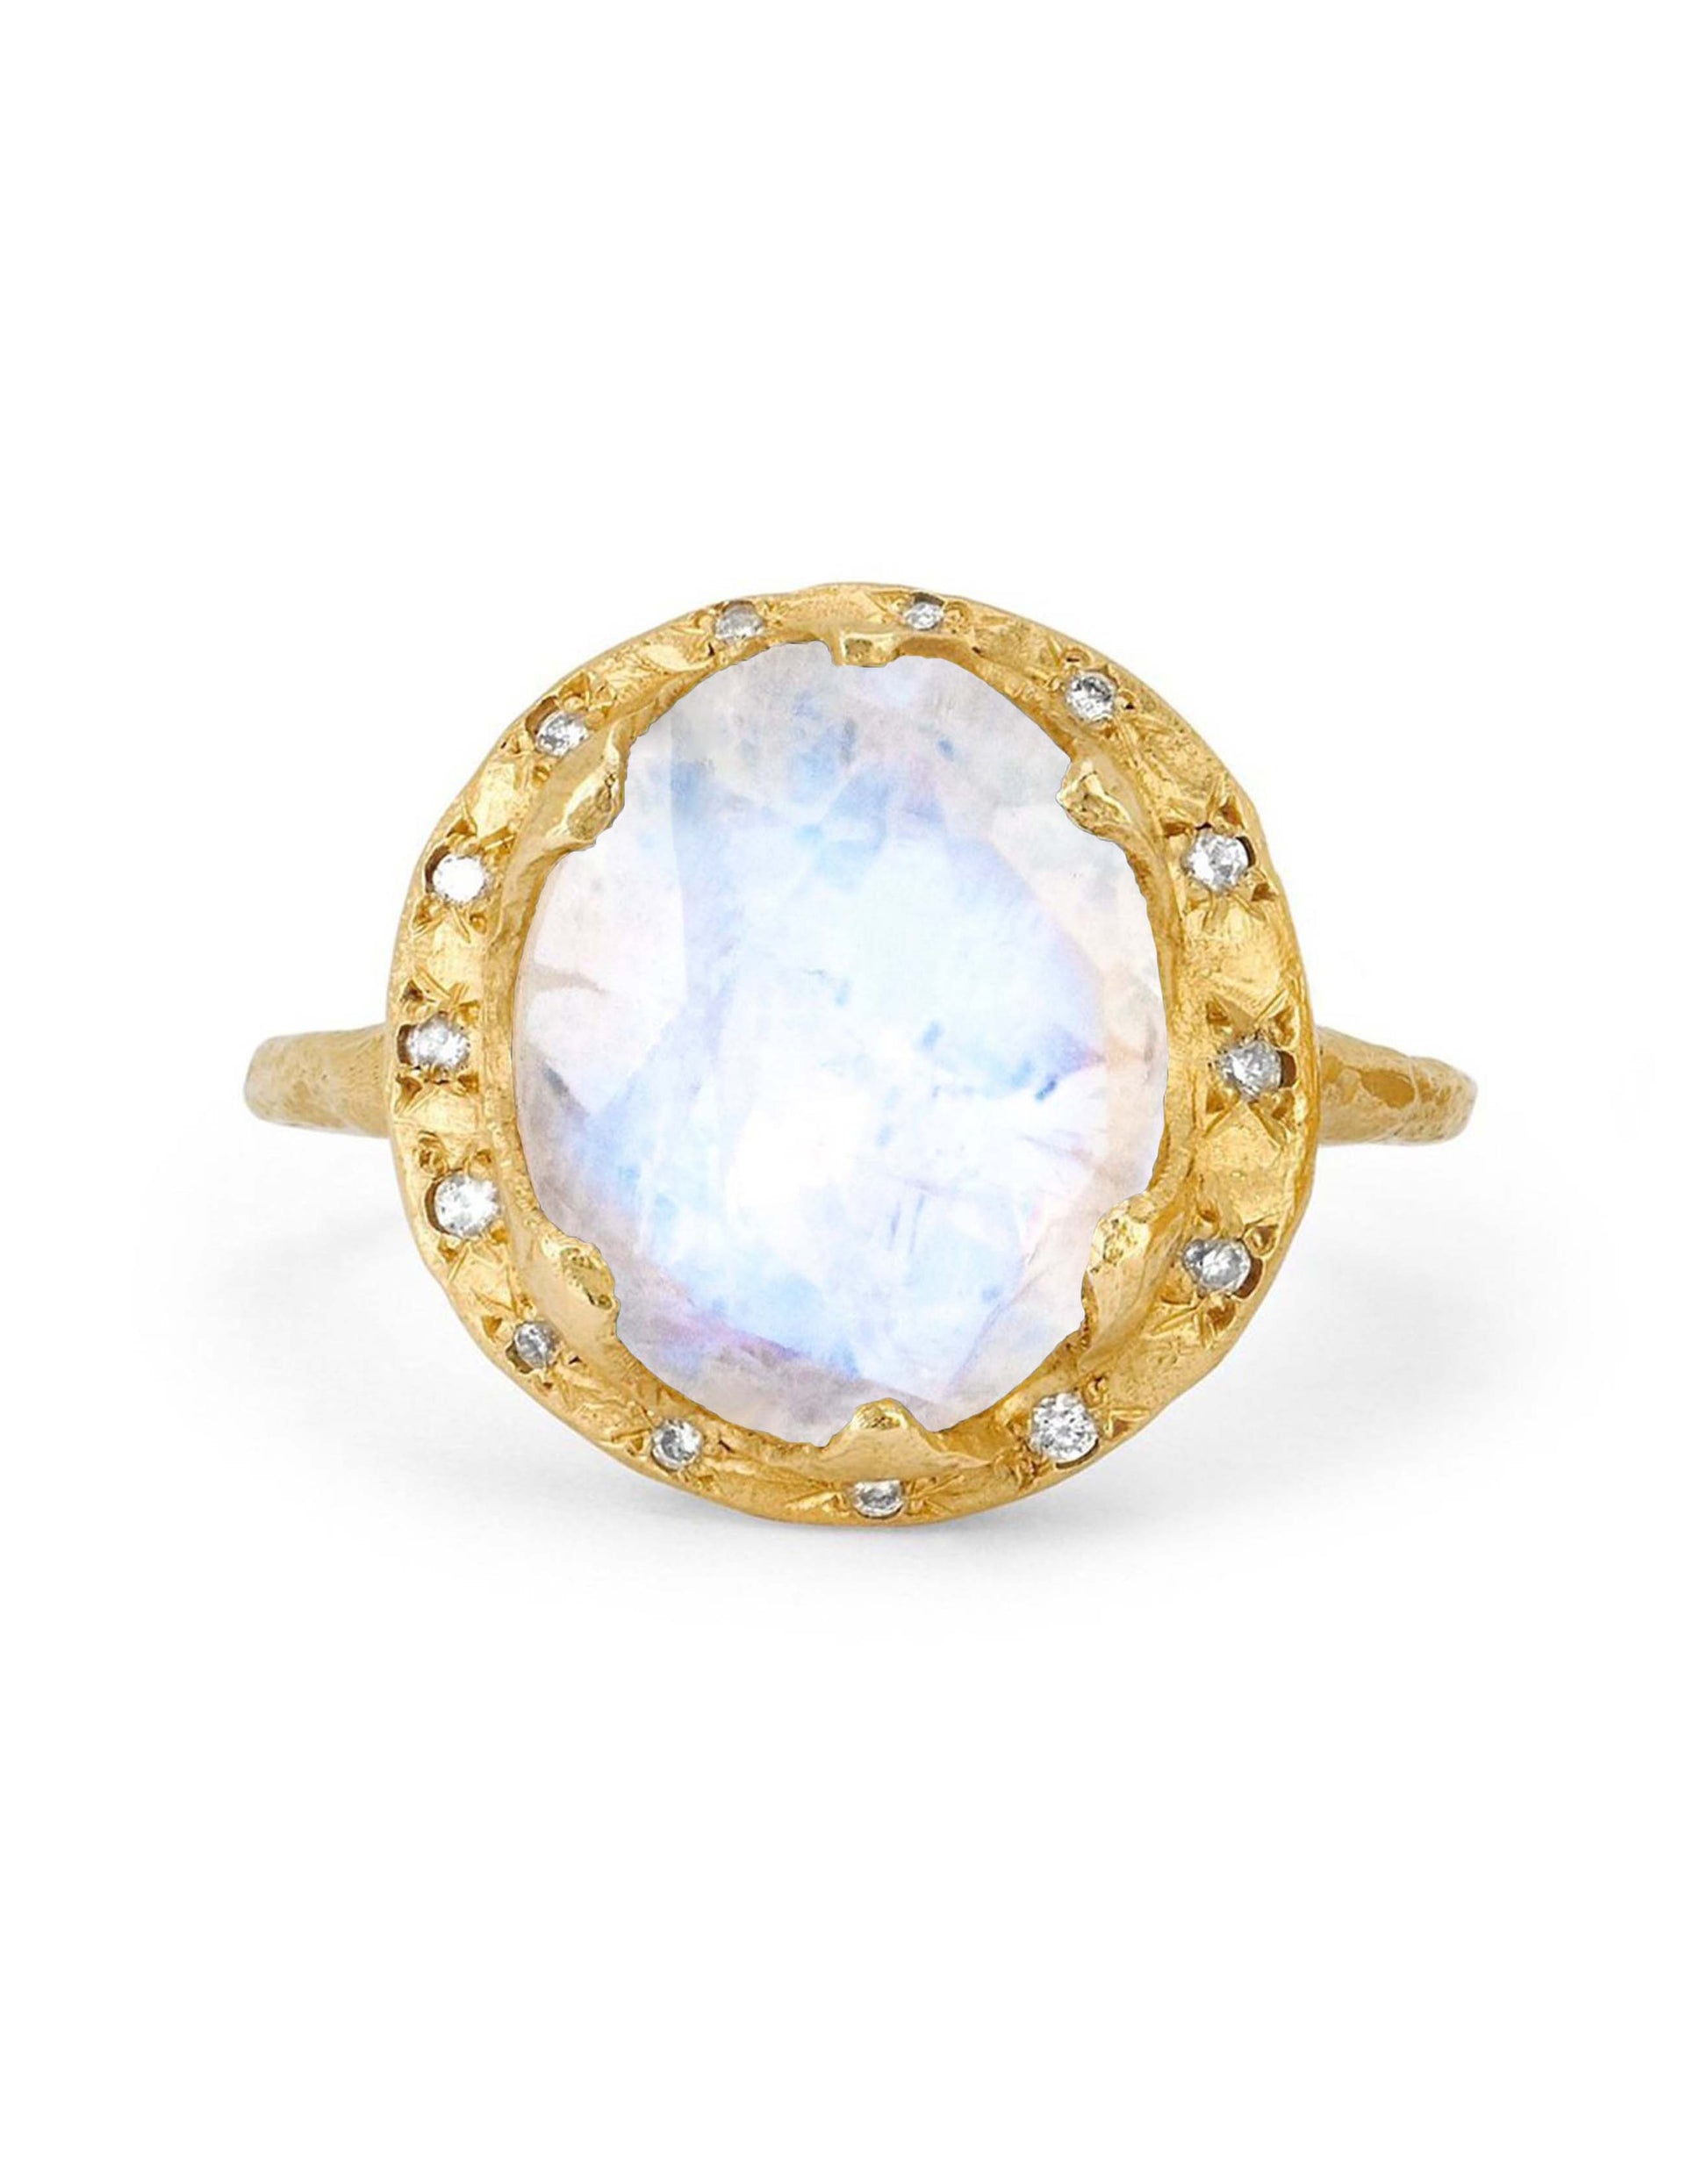 LOGAN HOLLOWELL-Queen Oval Moonstone Ring with Sprinkled Diamonds-YELLOW GOLD